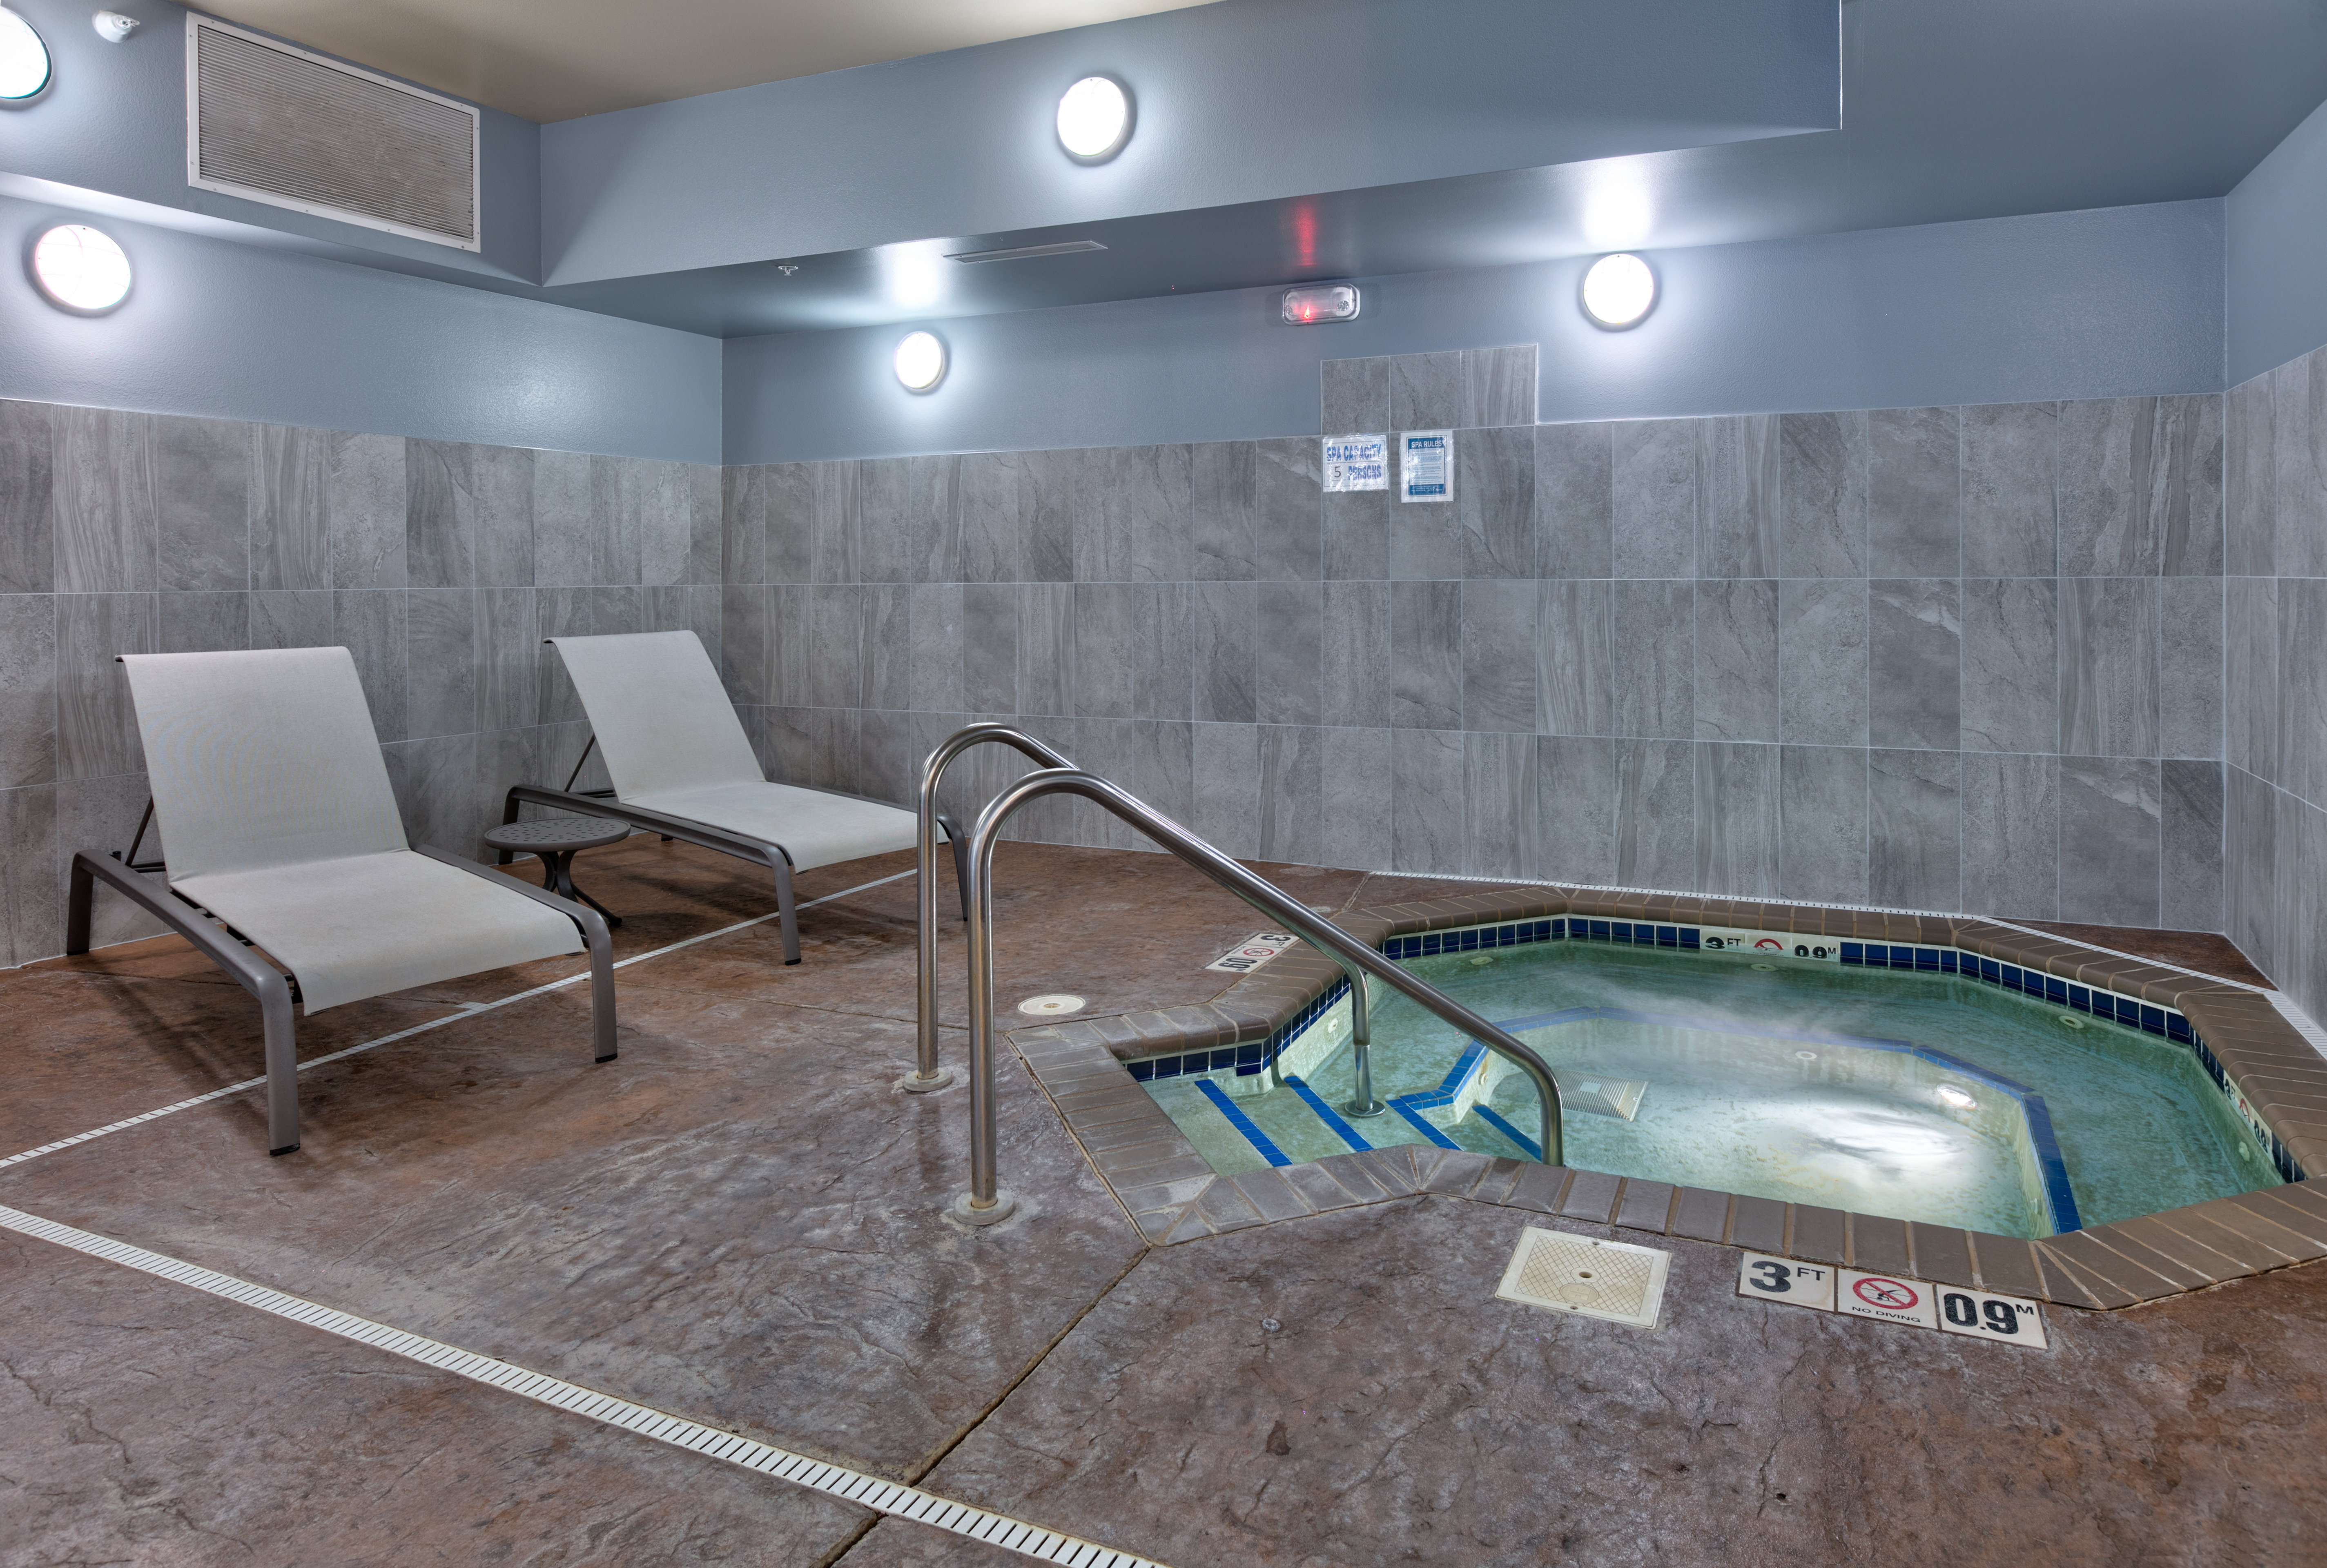 Enjoy some relaxing time in our whirlpool! 